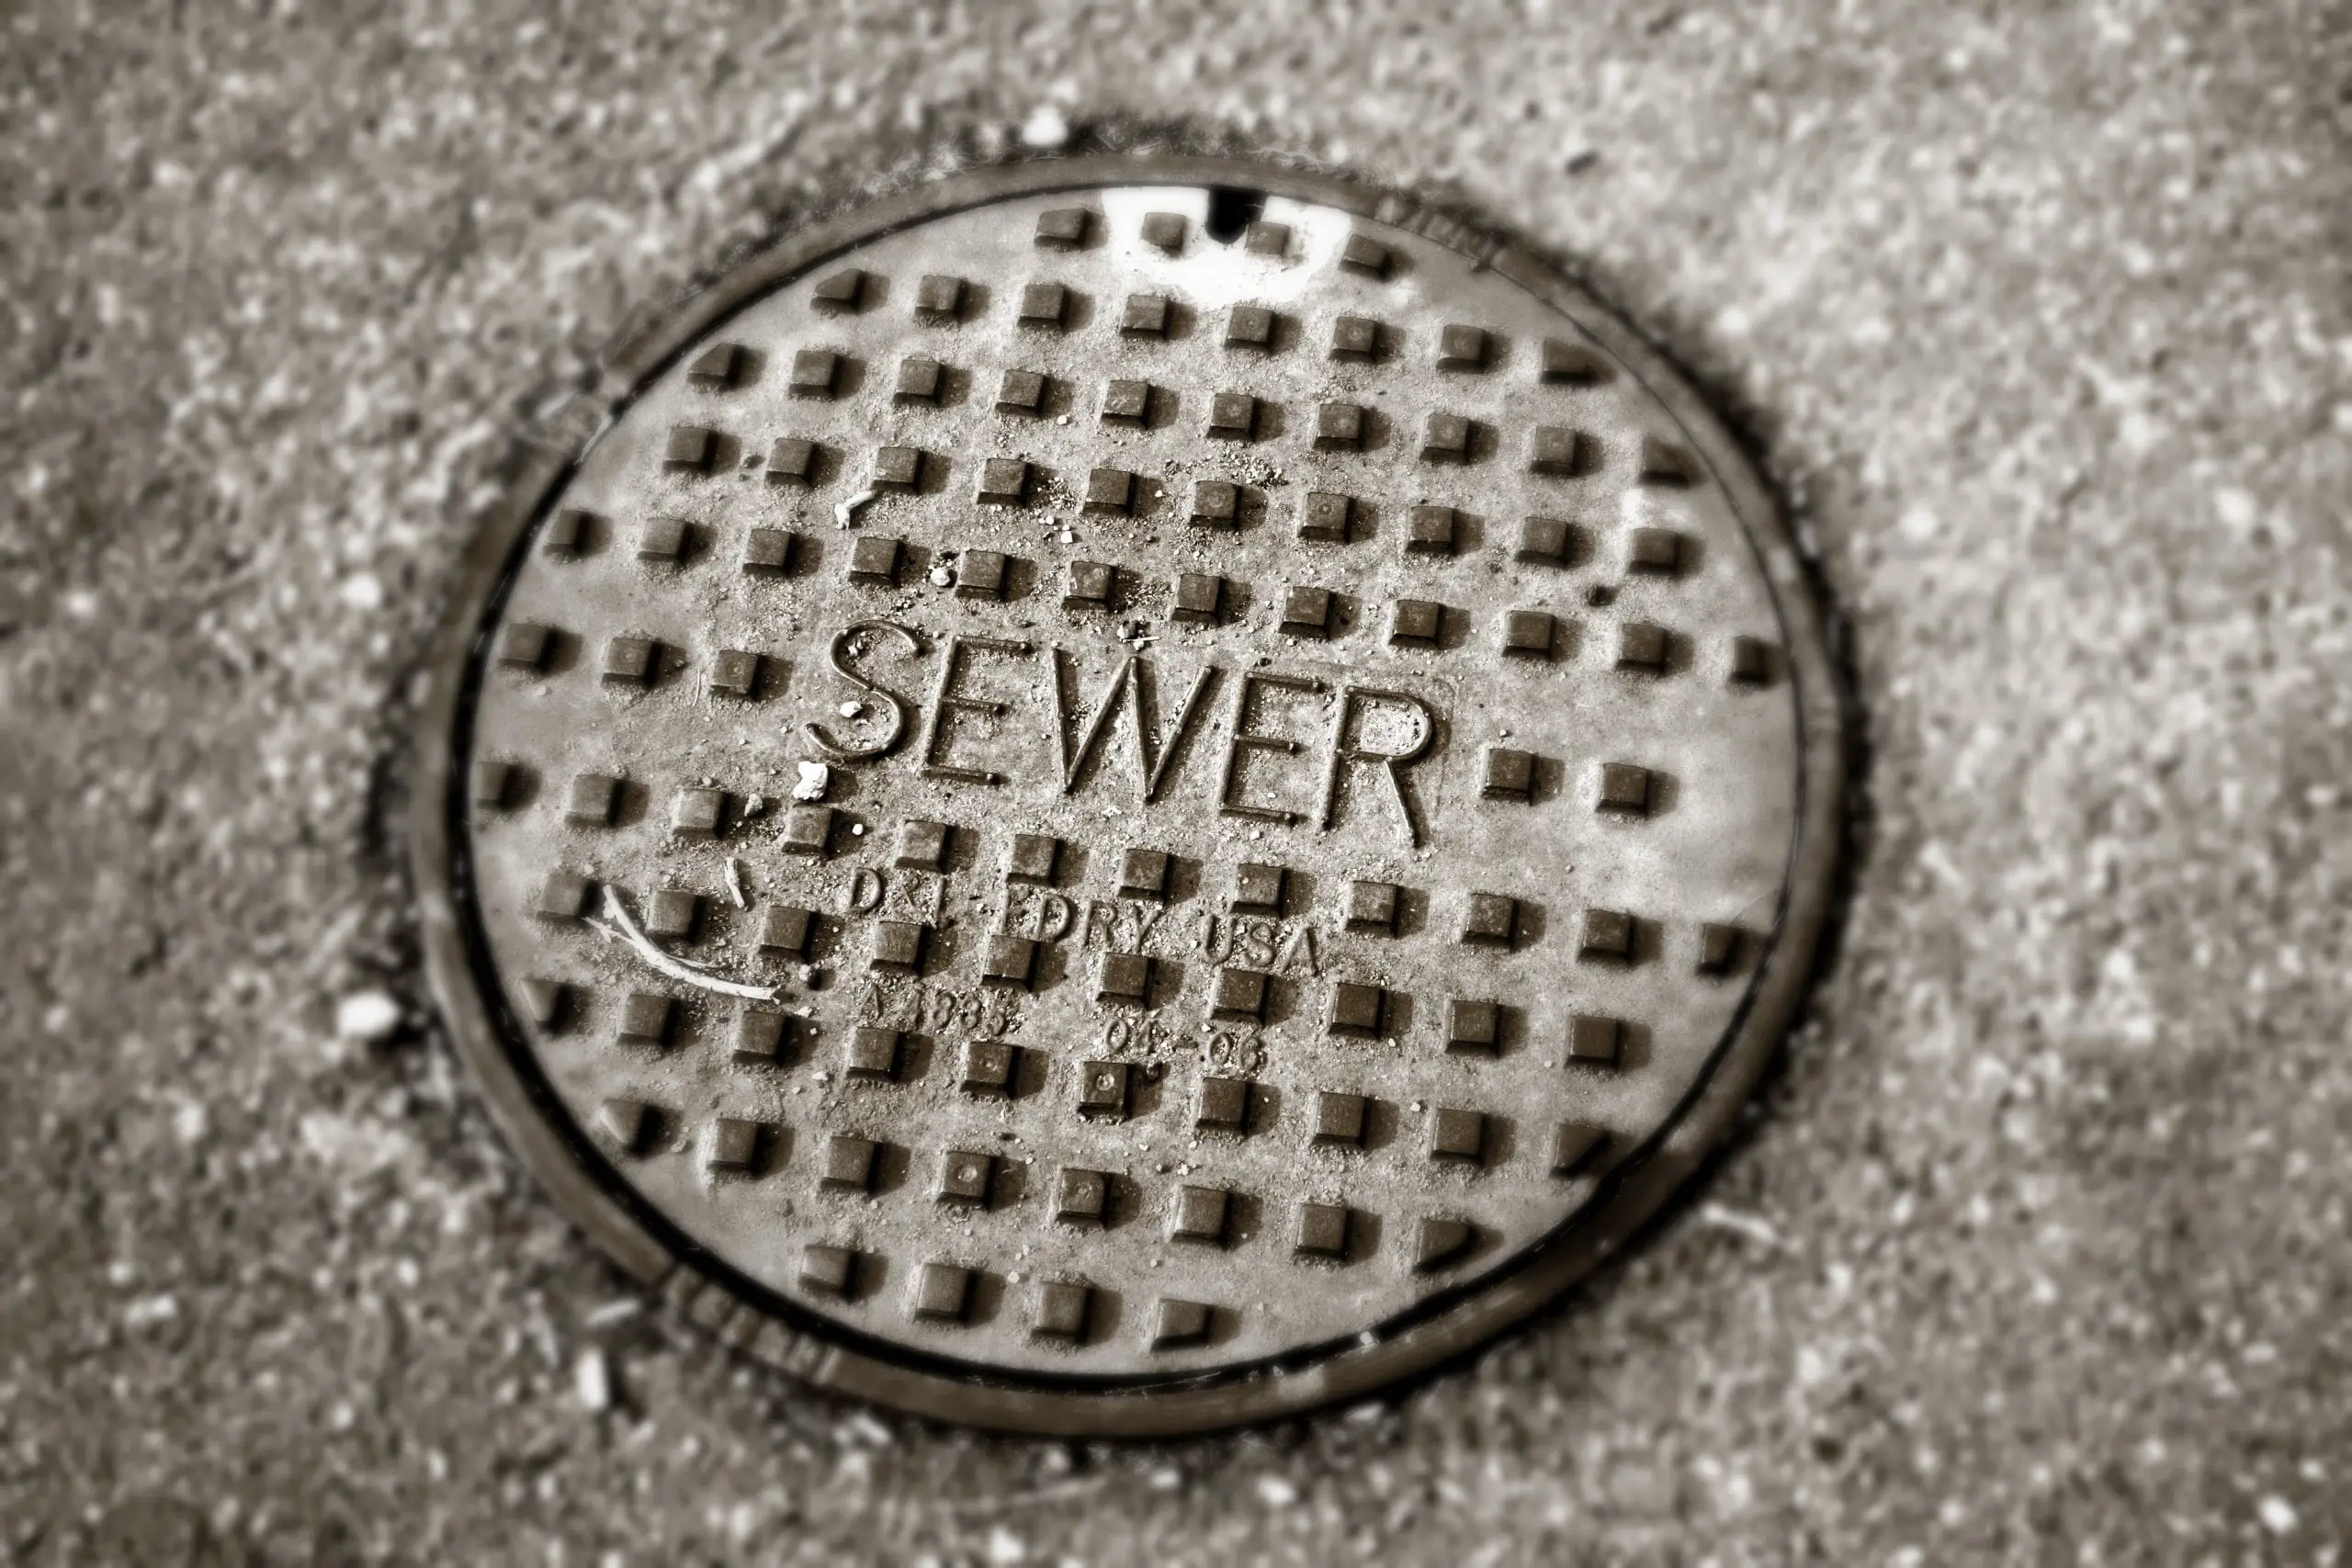 a non-exploded manhole cover